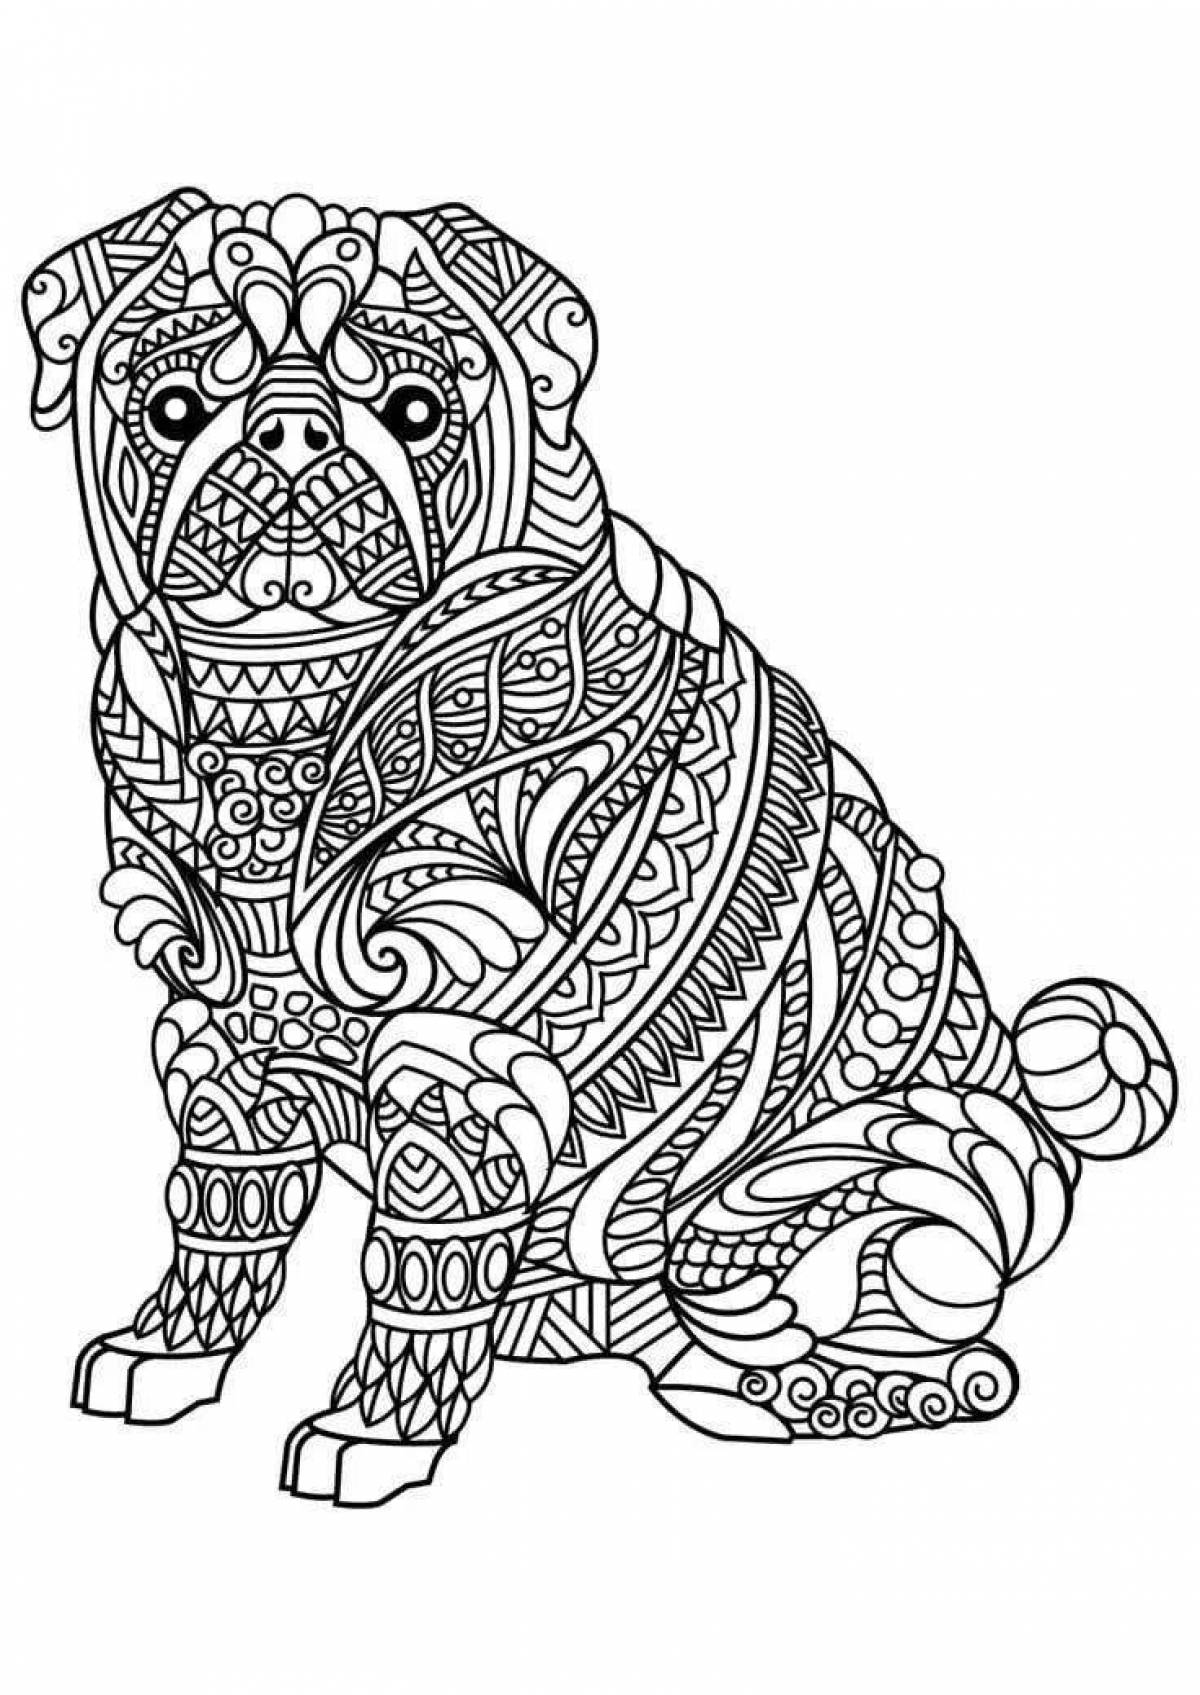 Bright anti-stress coloring book for dogs